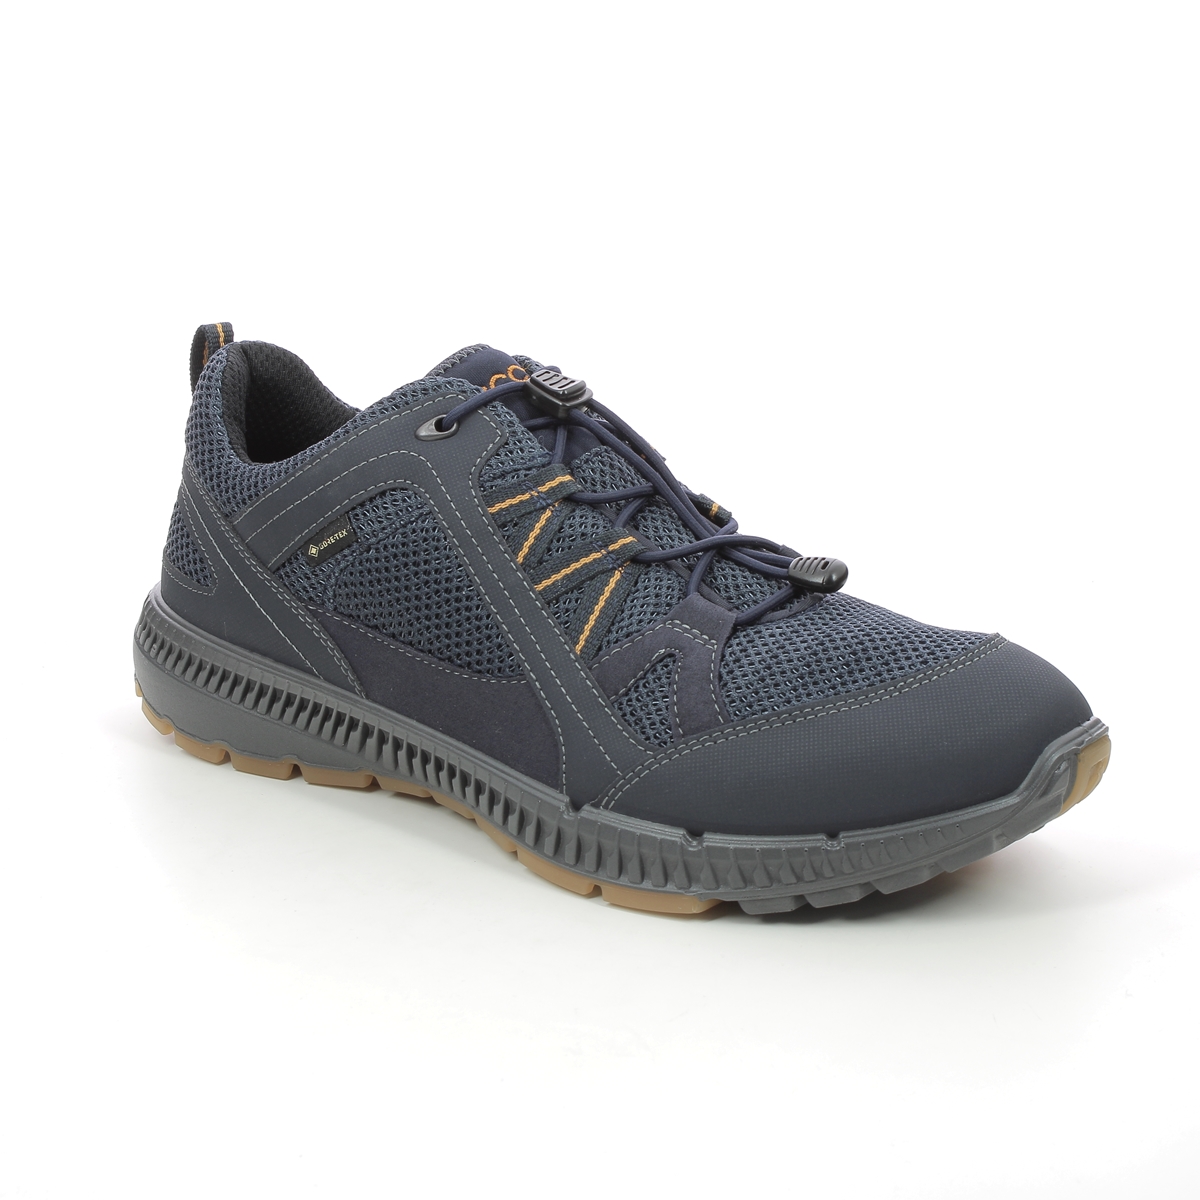 ECCO Terracruise Gtx Navy Mens trainers 843064-51241 in a Plain Man-made in Size 43